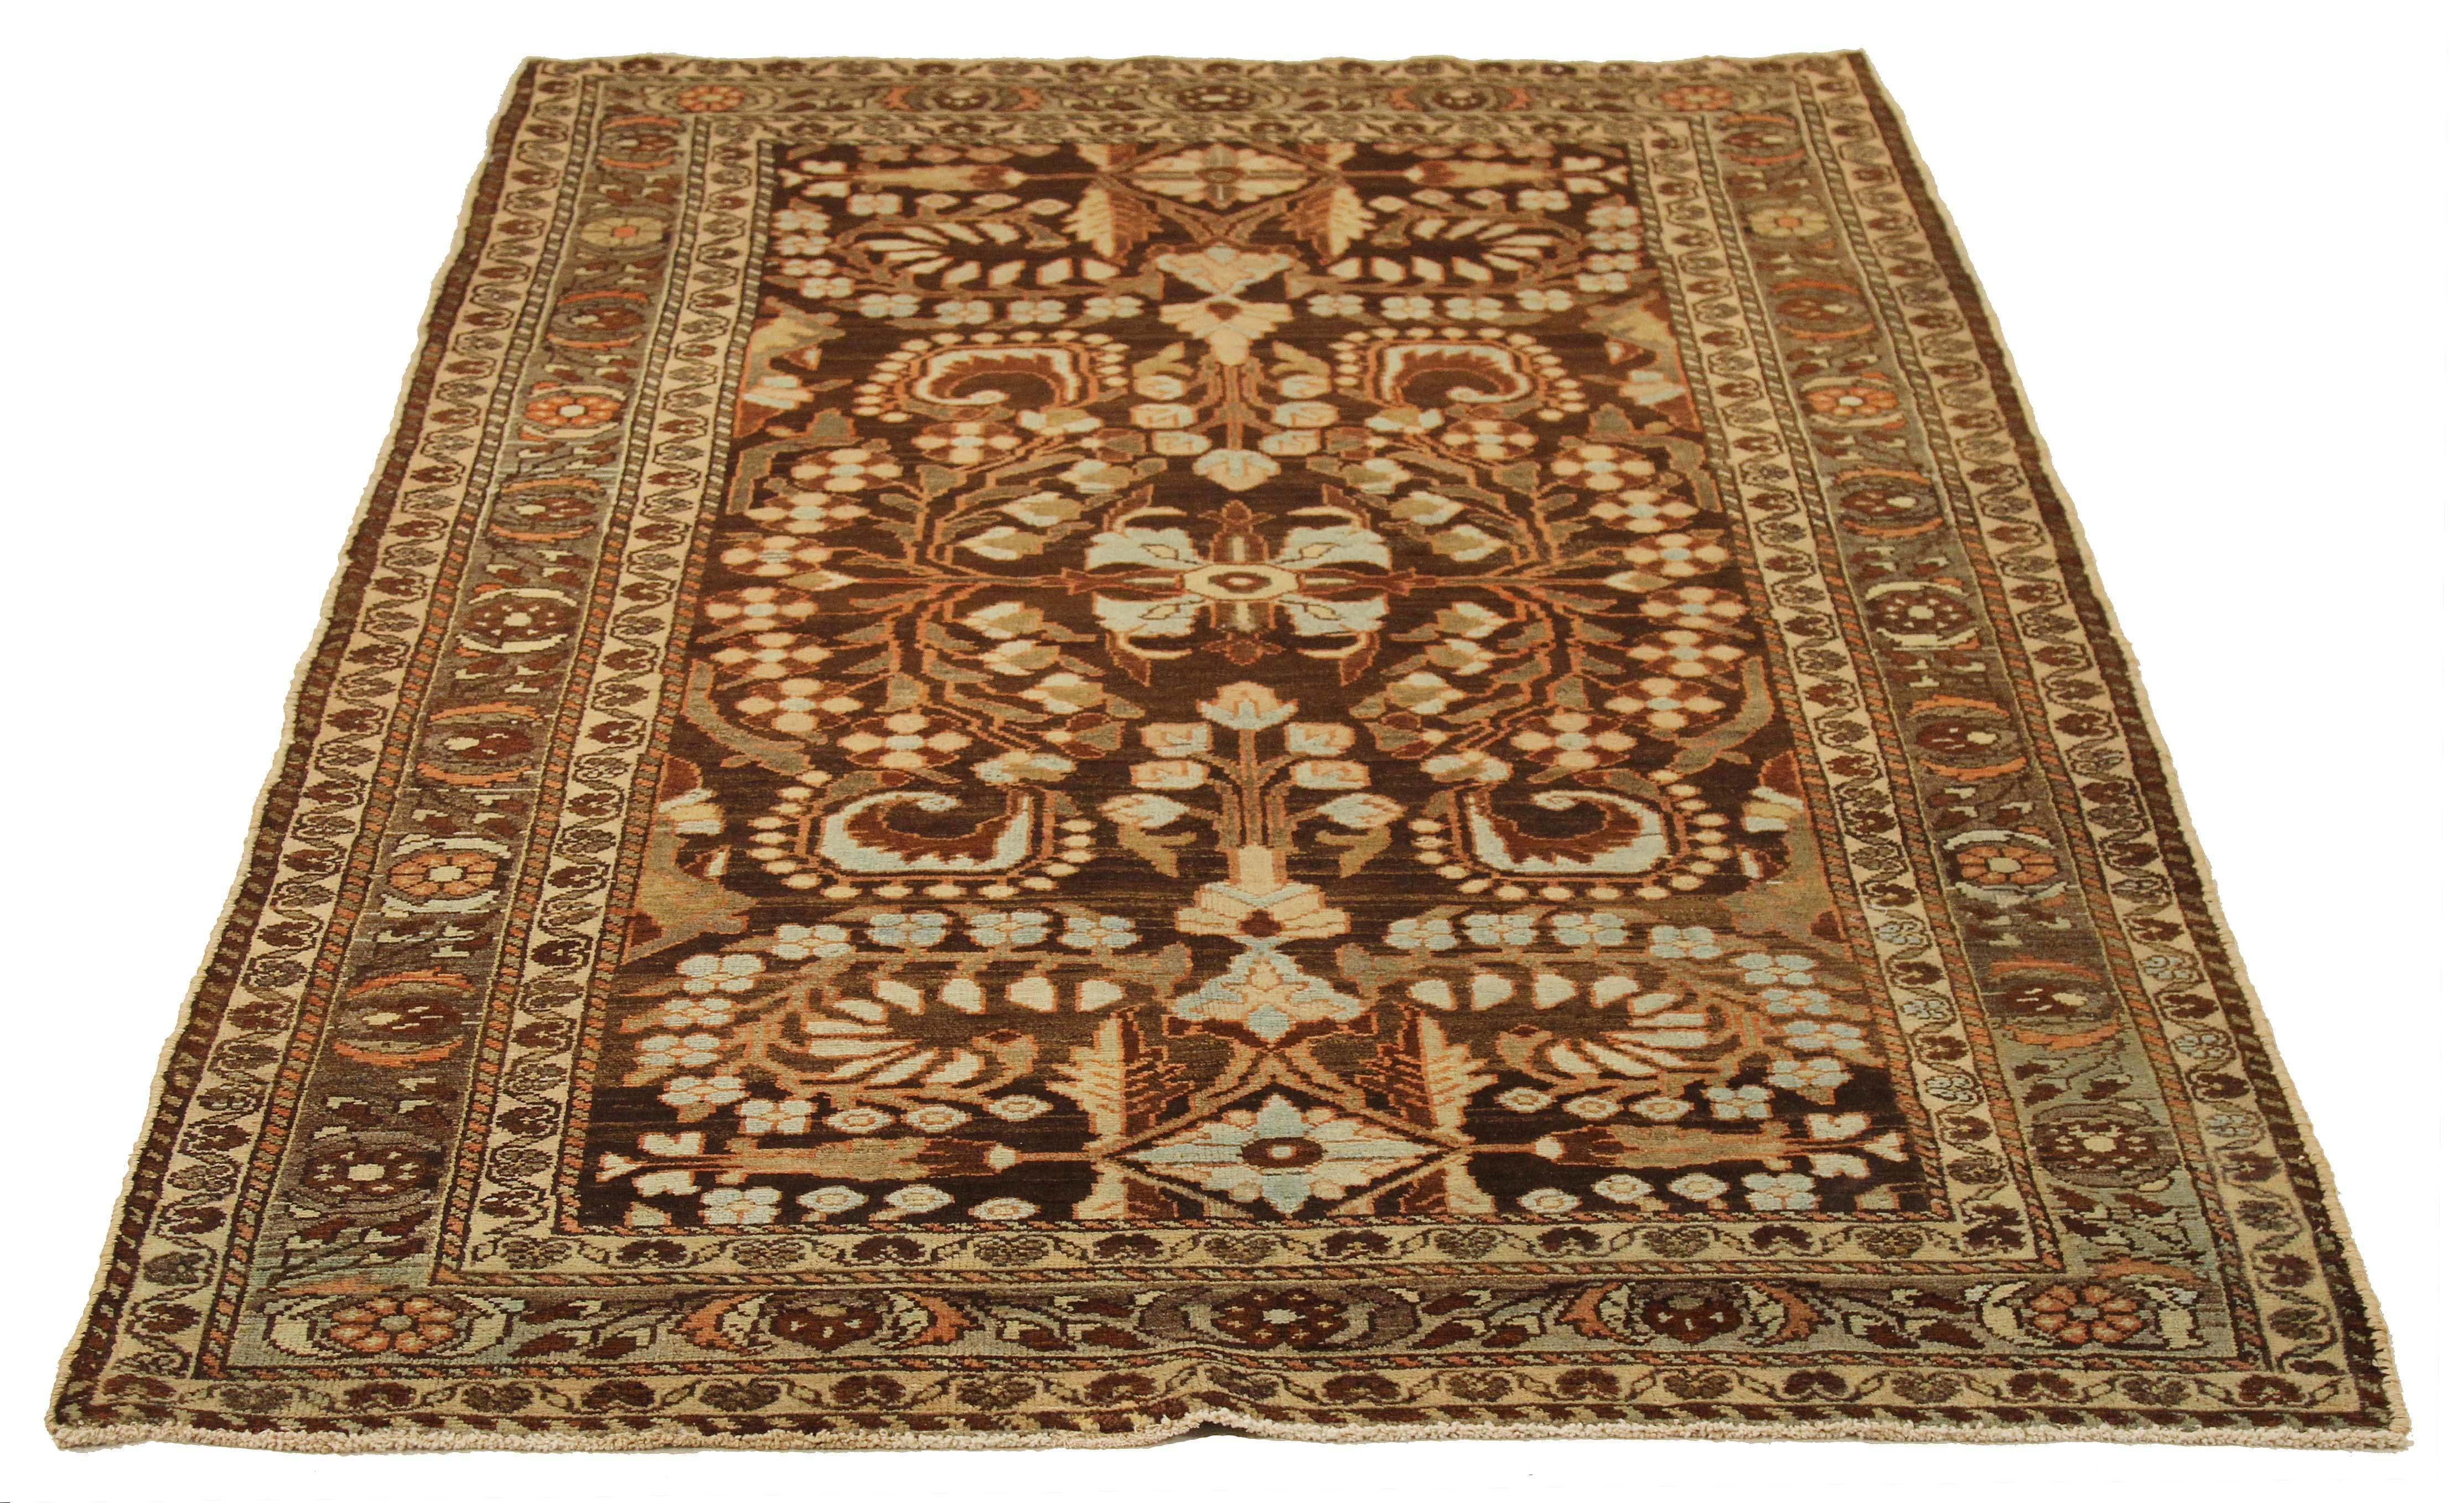 Antique Persian rug handwoven from the finest sheep’s wool and colored with all-natural vegetable dyes that are safe for humans and pets. It’s a traditional Hamedan design featuring floral patterns in green and blue over a brown field. The details